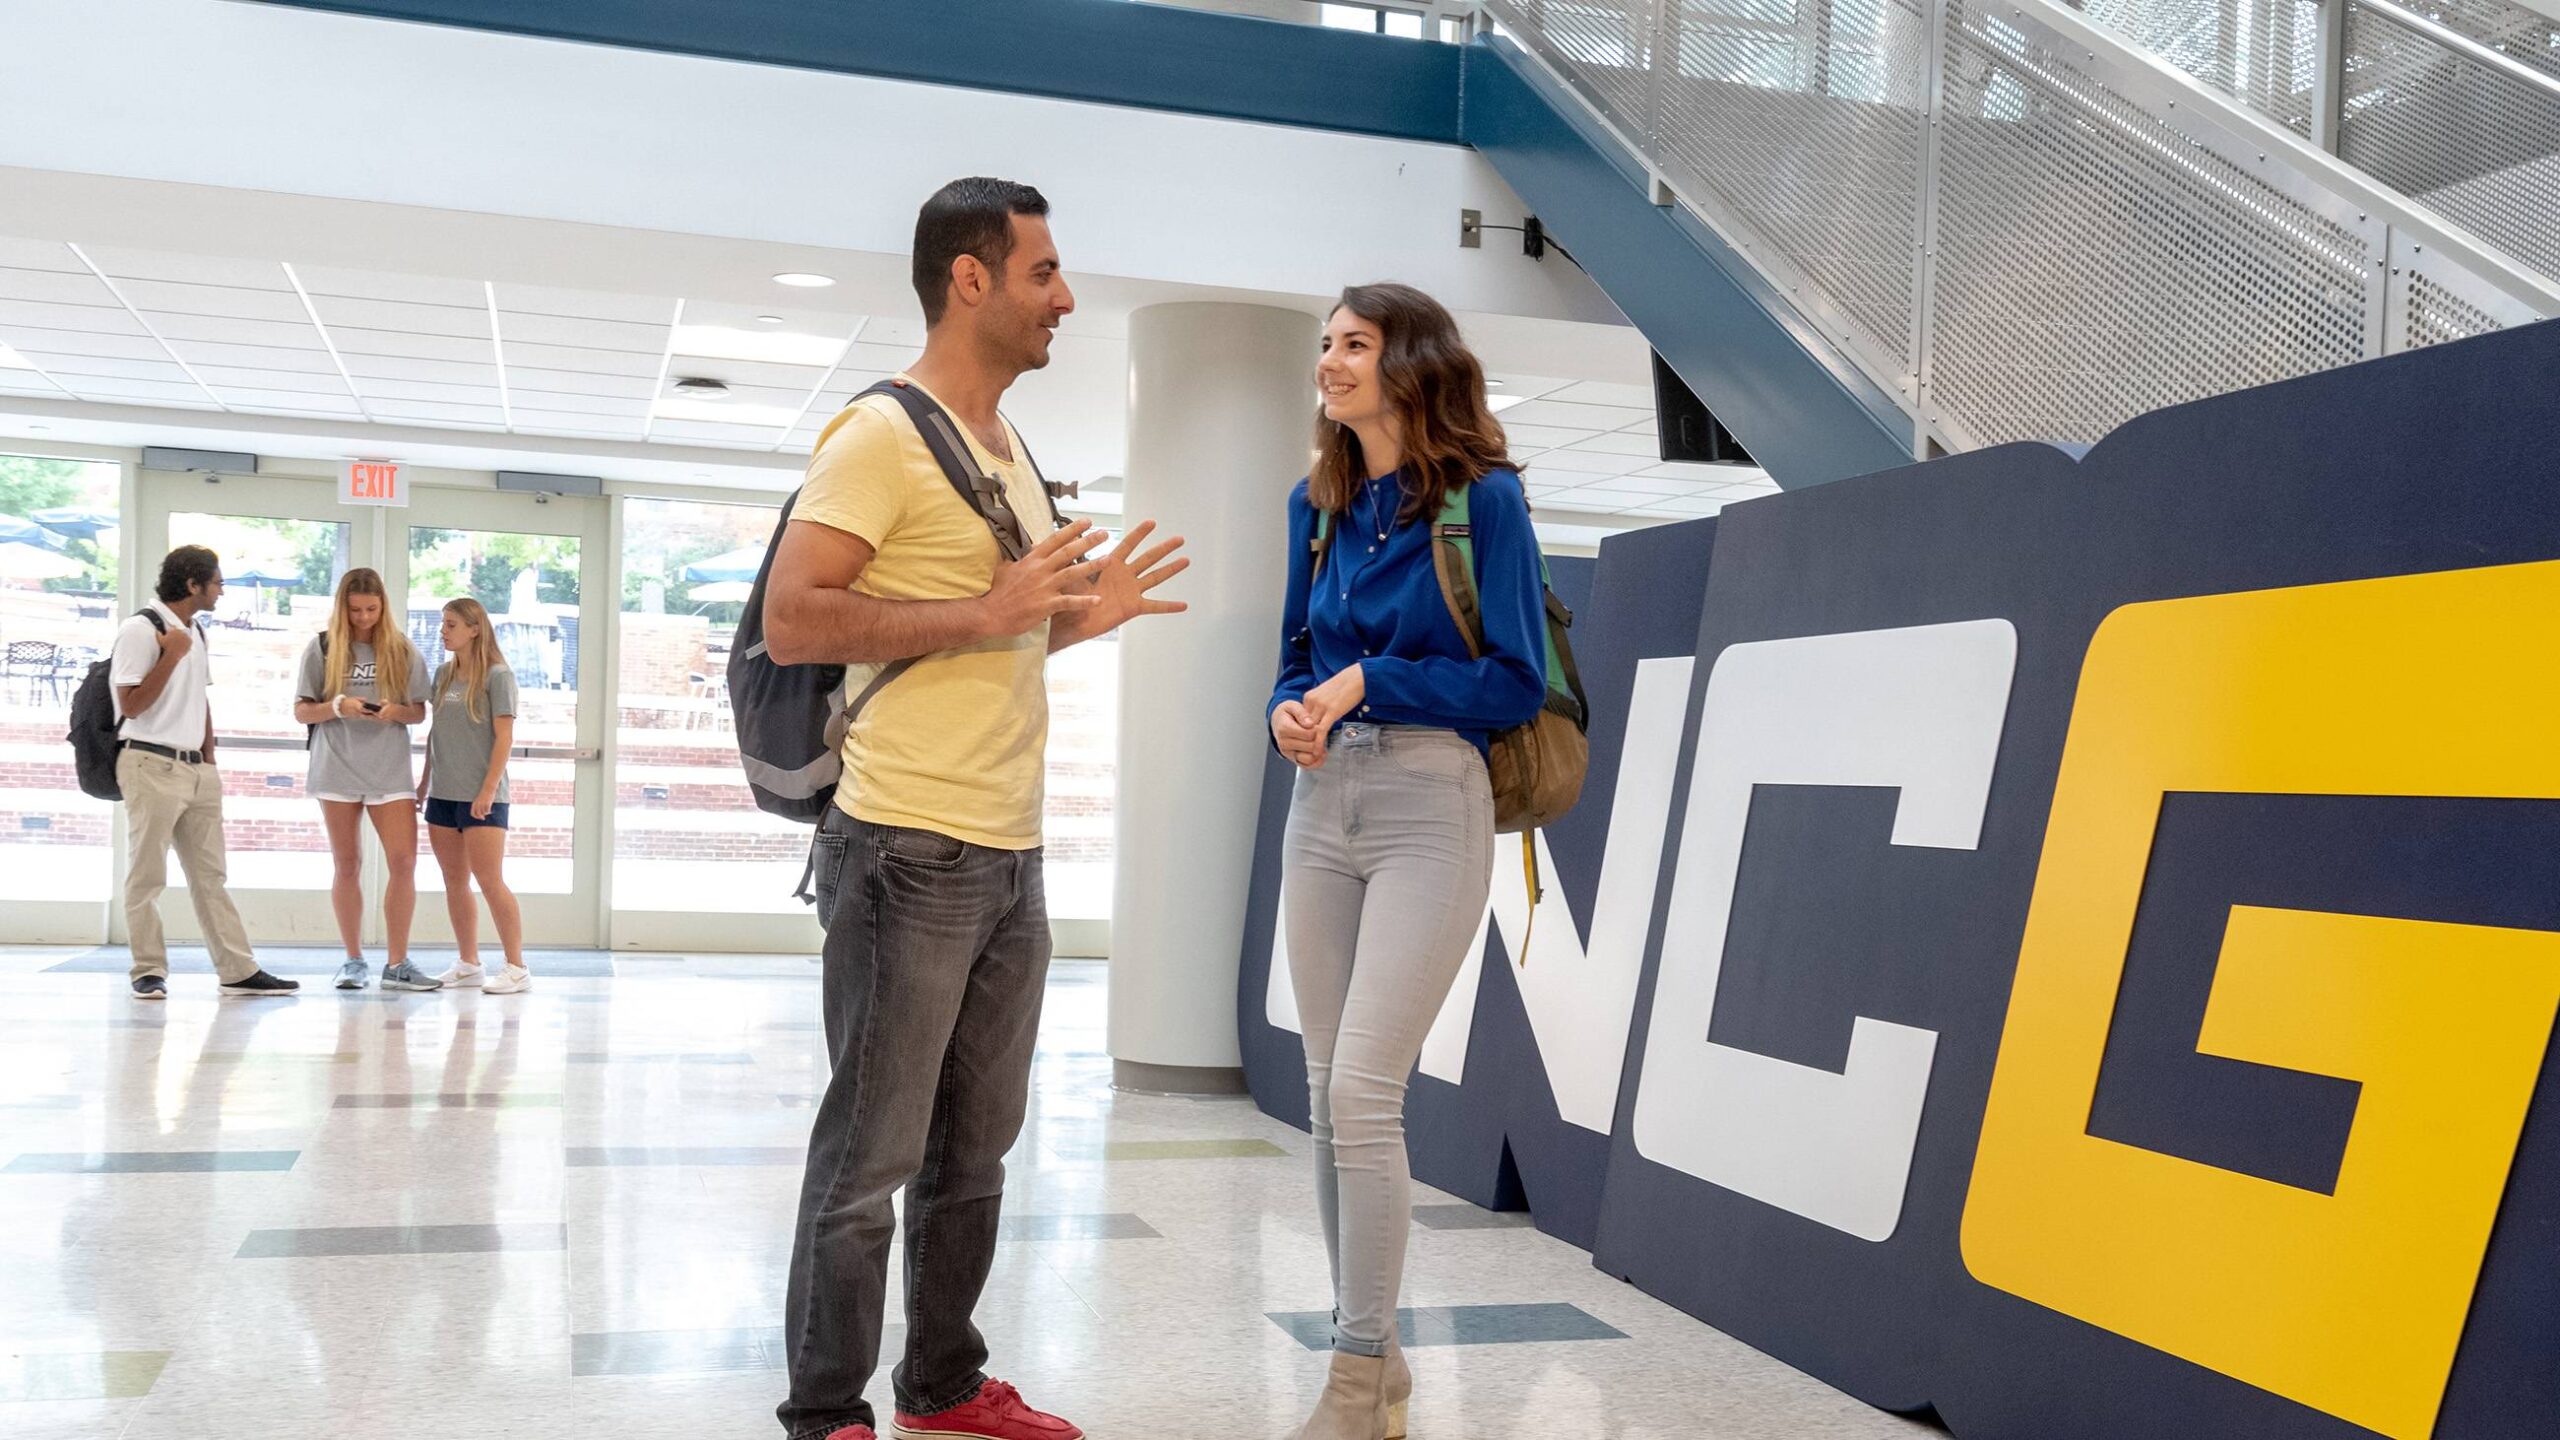 Students talking in front of the UNCG sign inside Moran Commons.